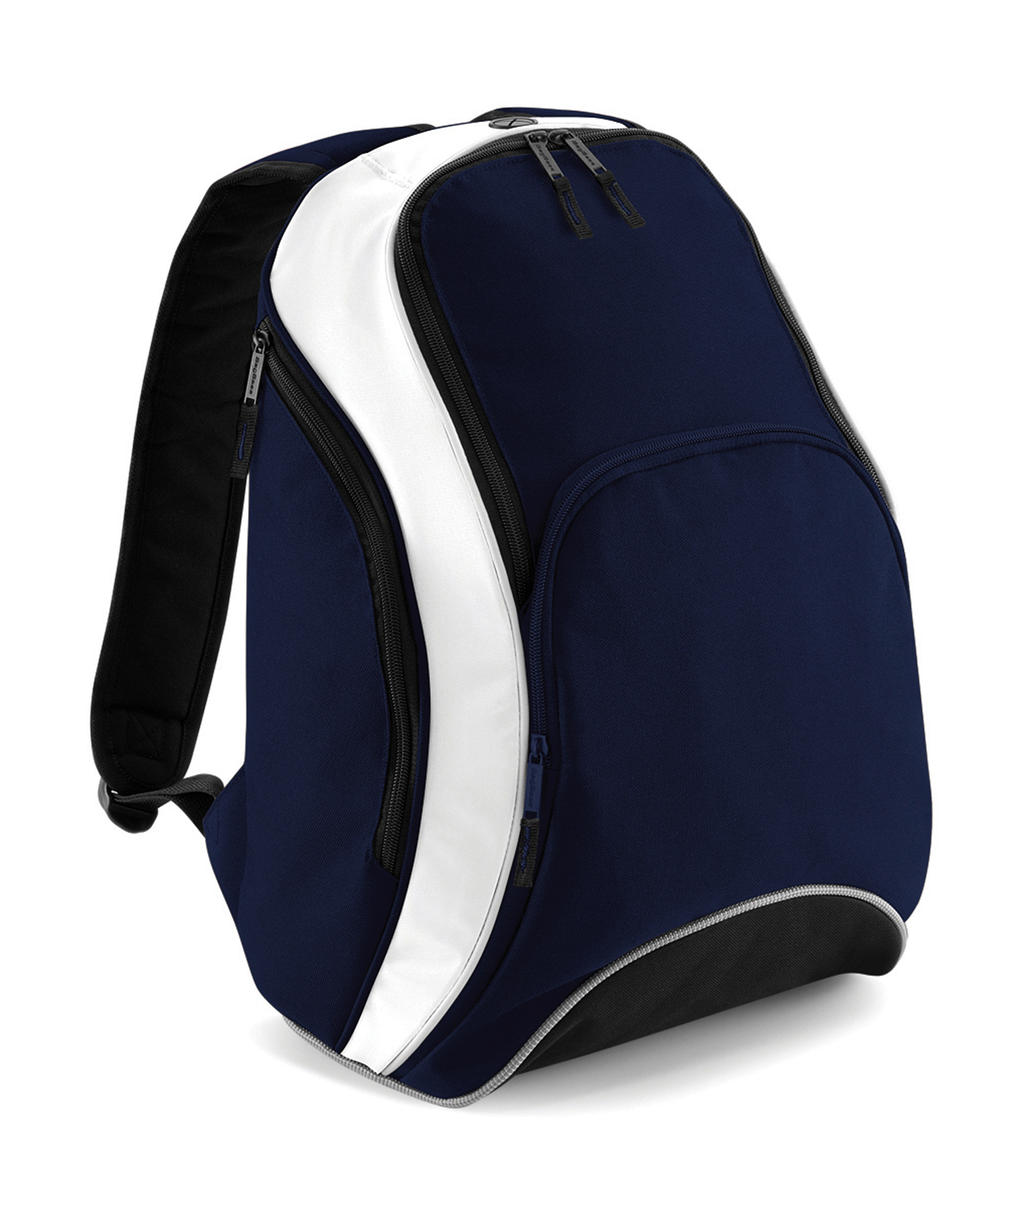  Teamwear Backpack in Farbe French Navy/White